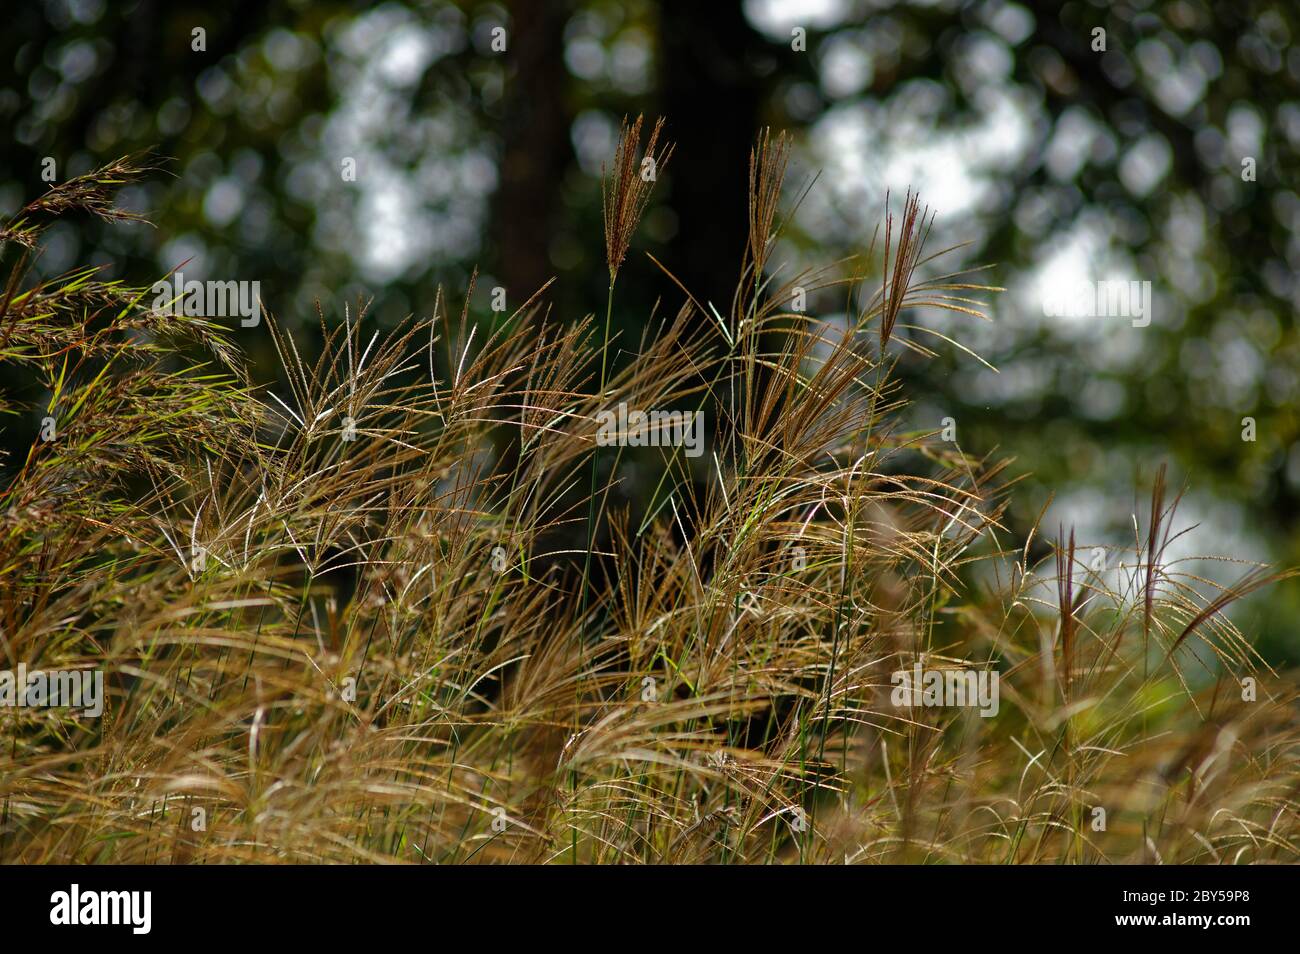 A field of golden grass blowing in the wind Stock Photo